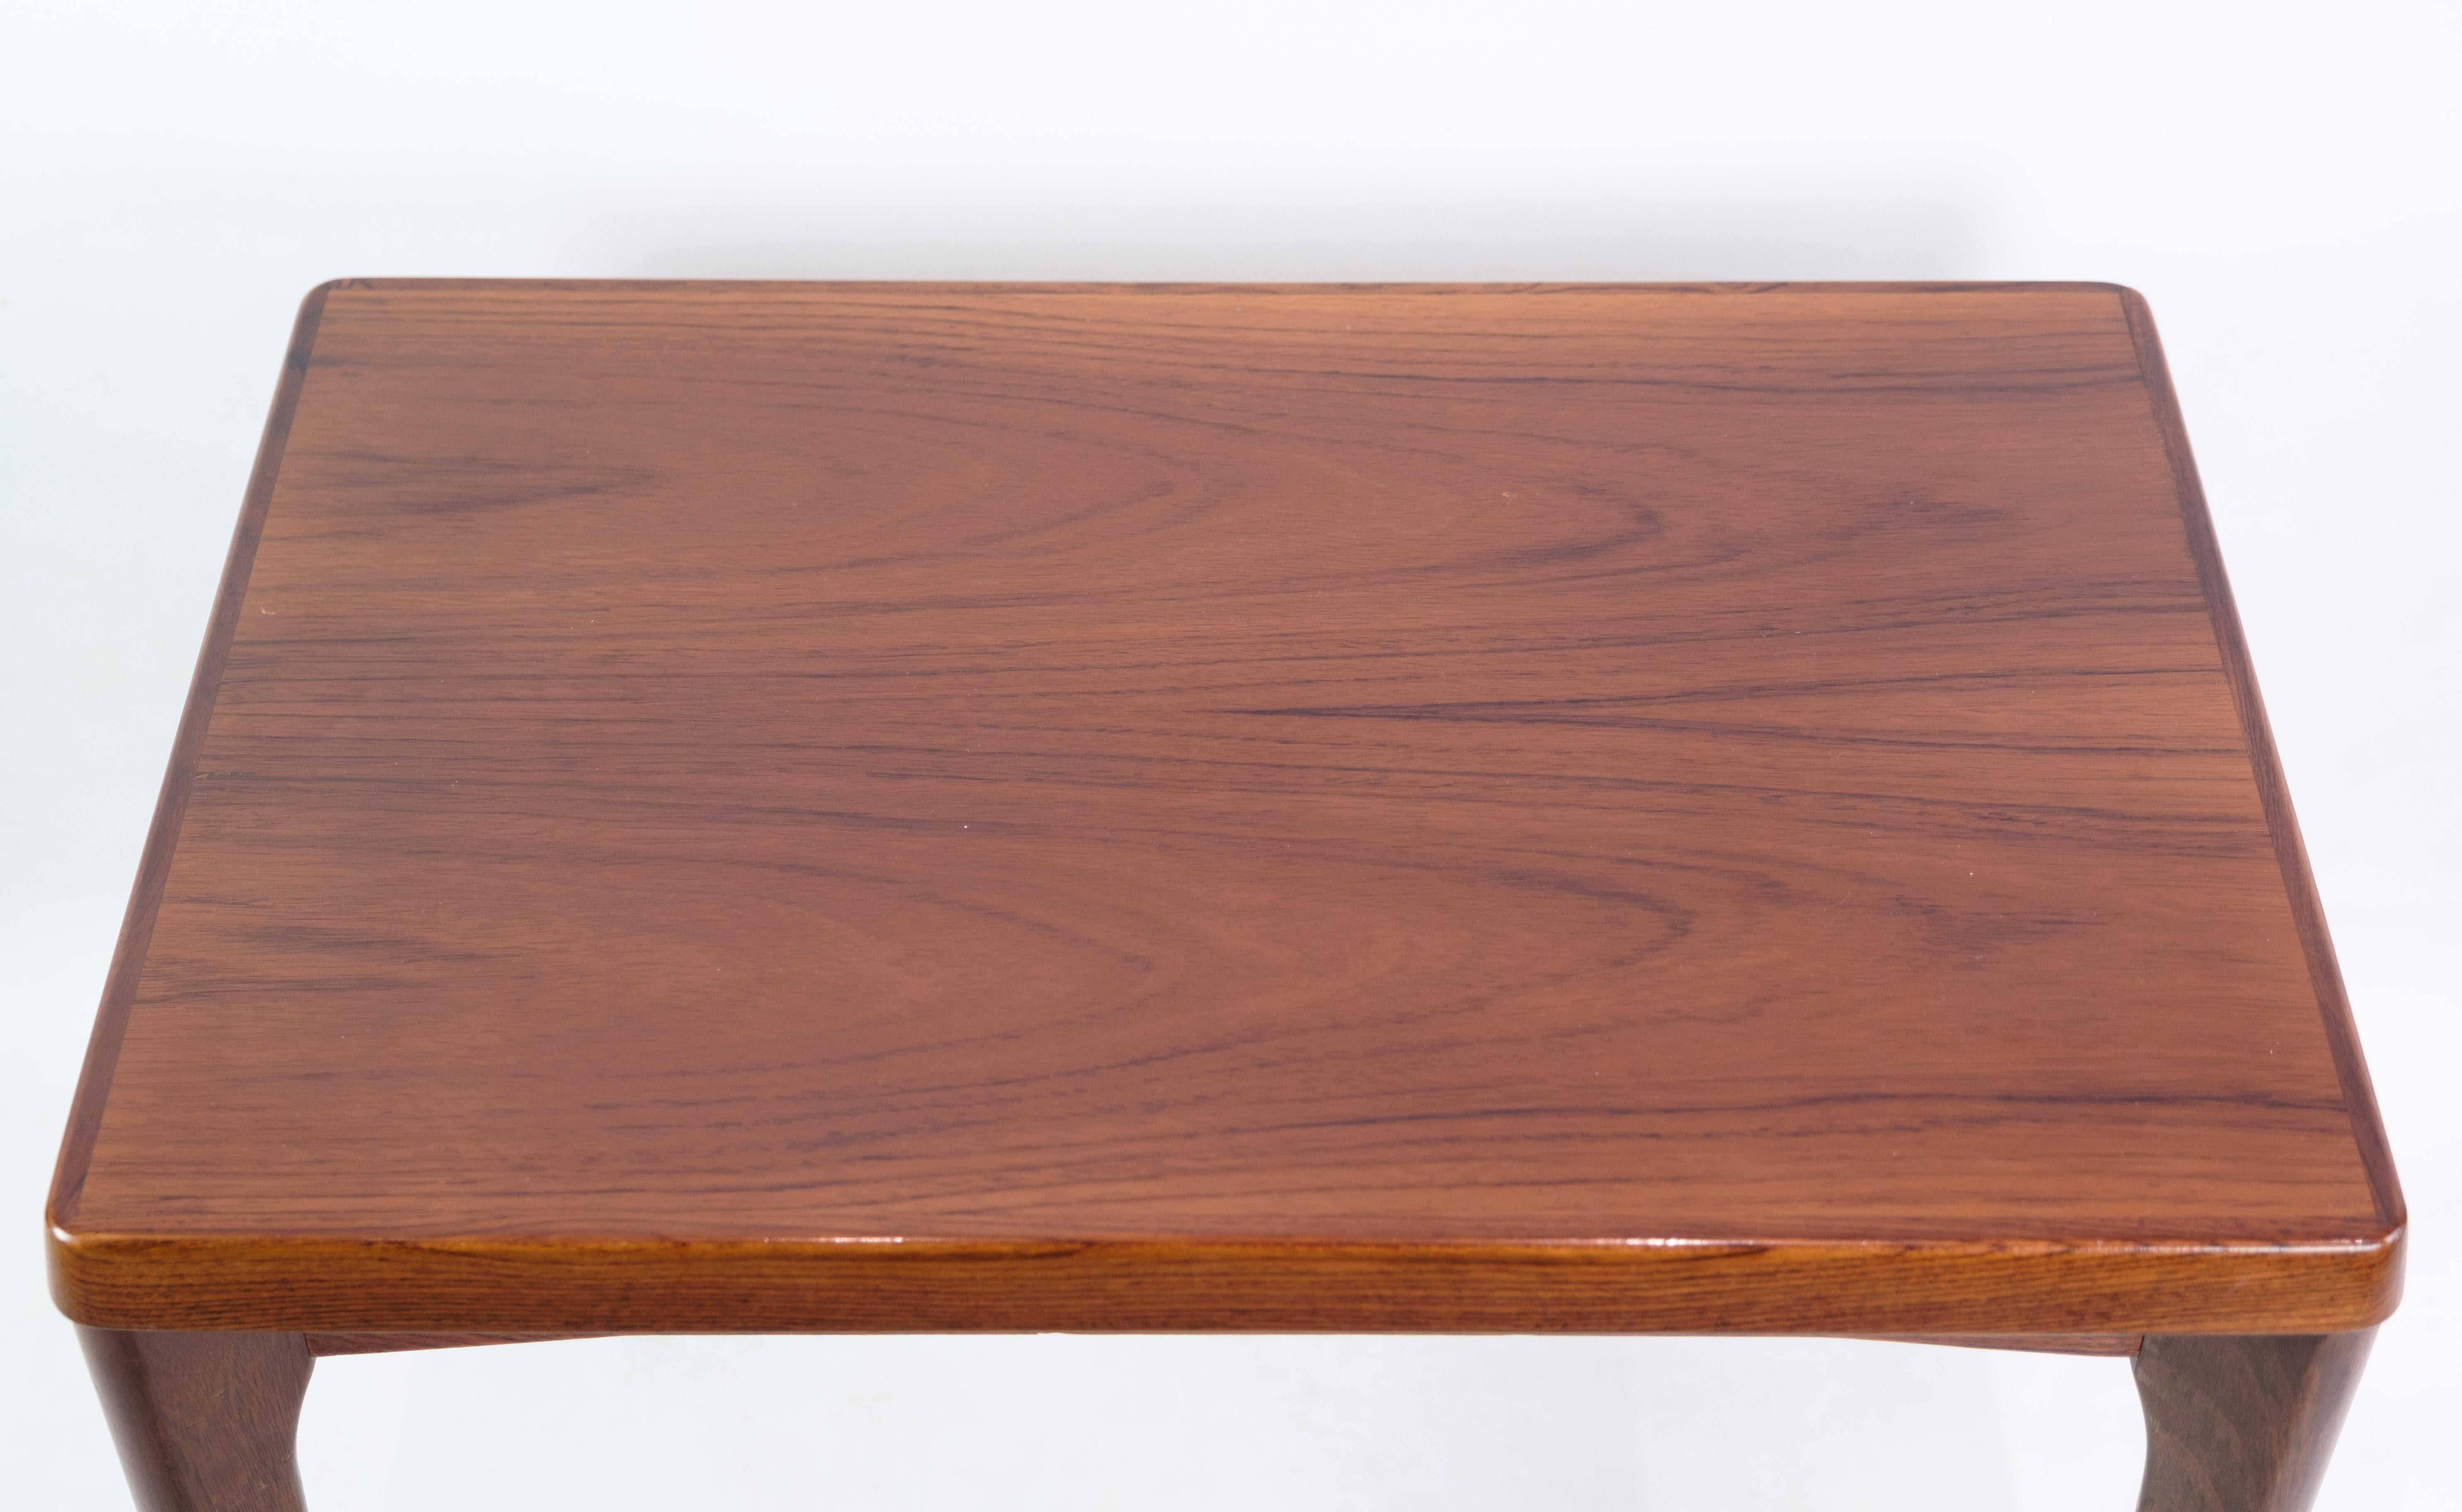 Side table in rosewood, designed by Henning Kjærnulf for Vejle chairs & møbelfabrik A / S from around the 1960s.

This product will be inspected thoroughly at our professional workshop by our educated employees, who assure the product quality